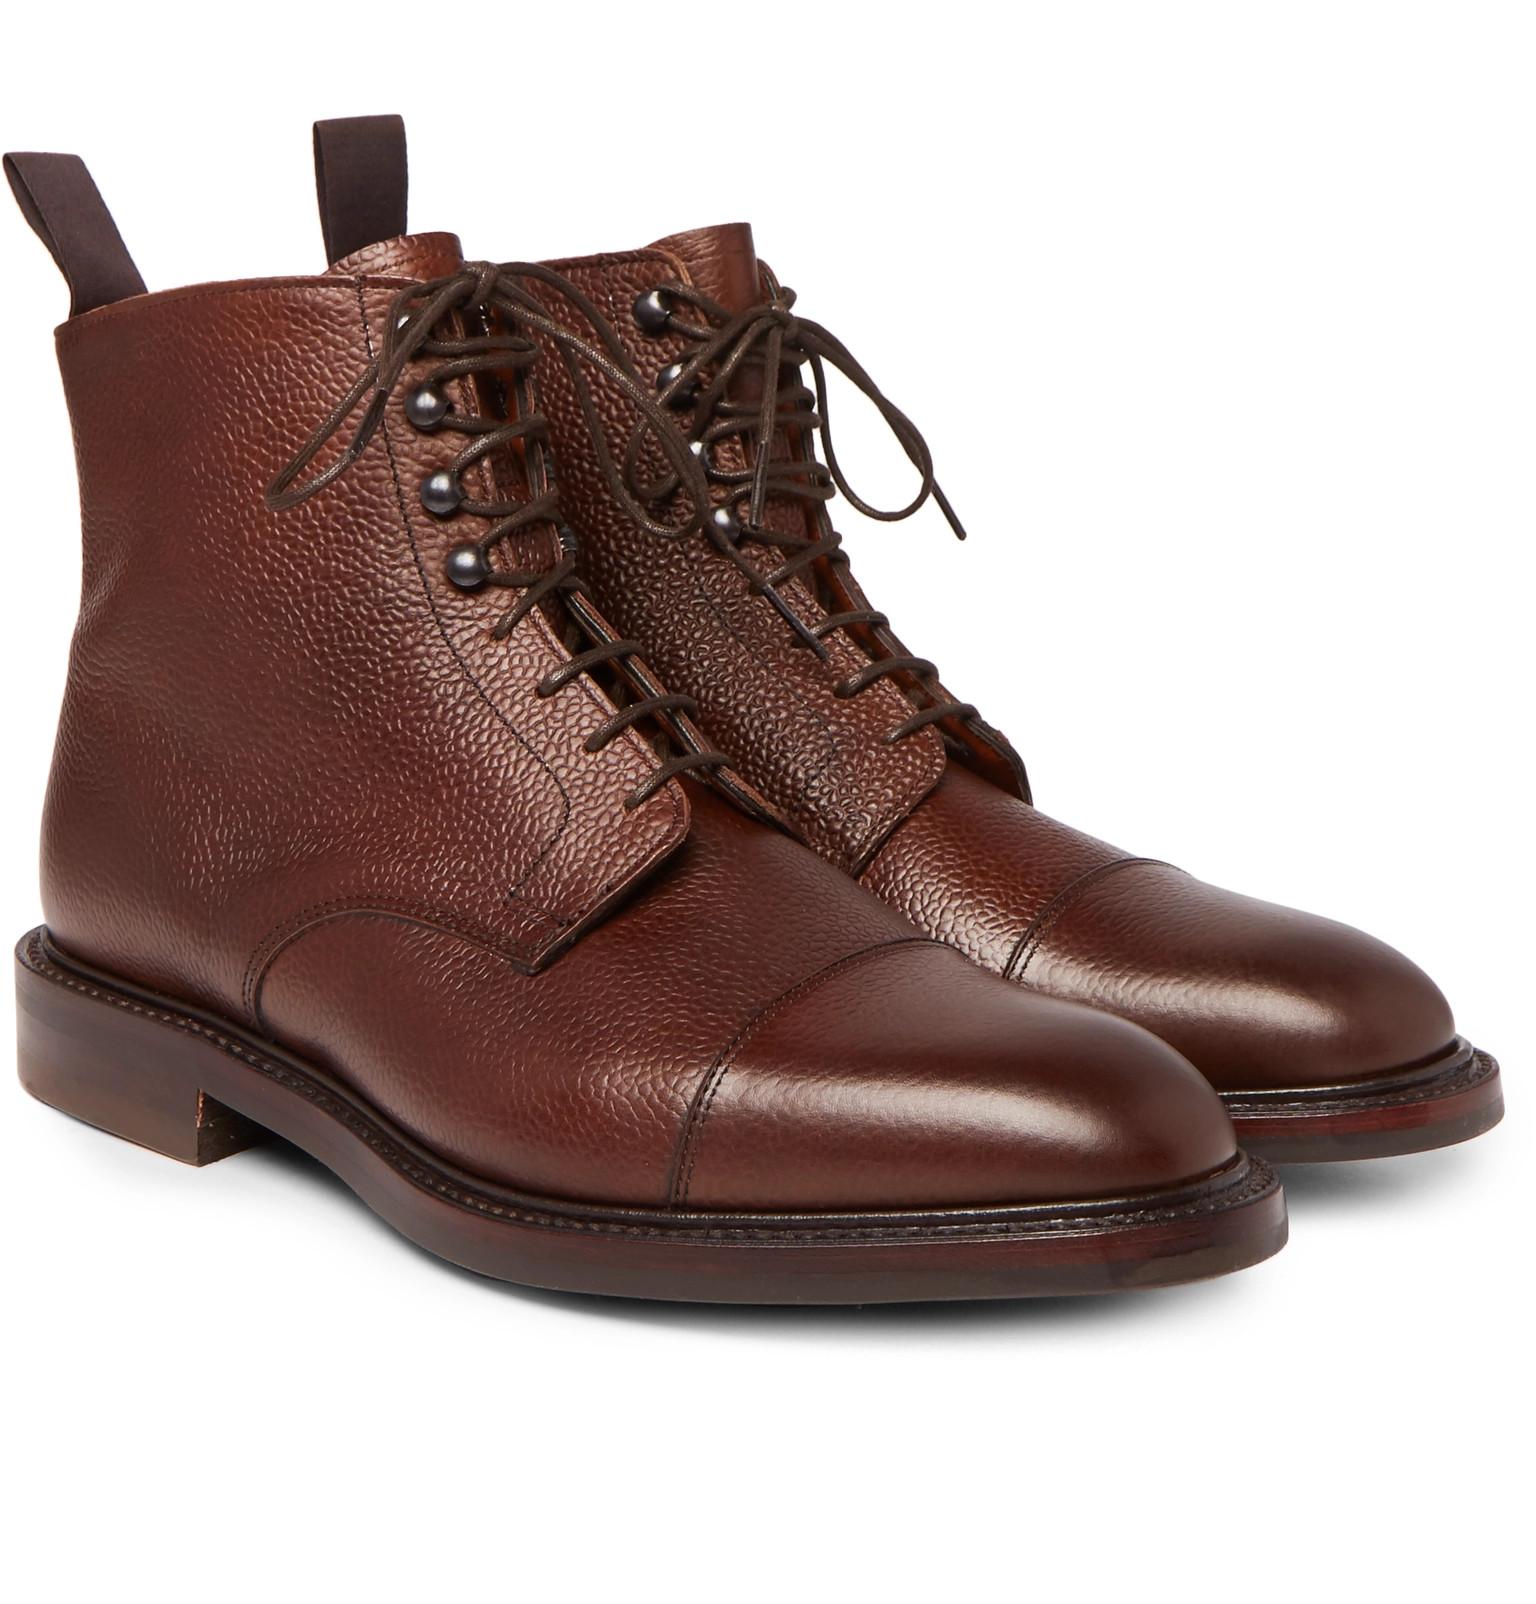 Kingsman George Cleverley Cap-toe Pebble-grain Leather Boots in ...